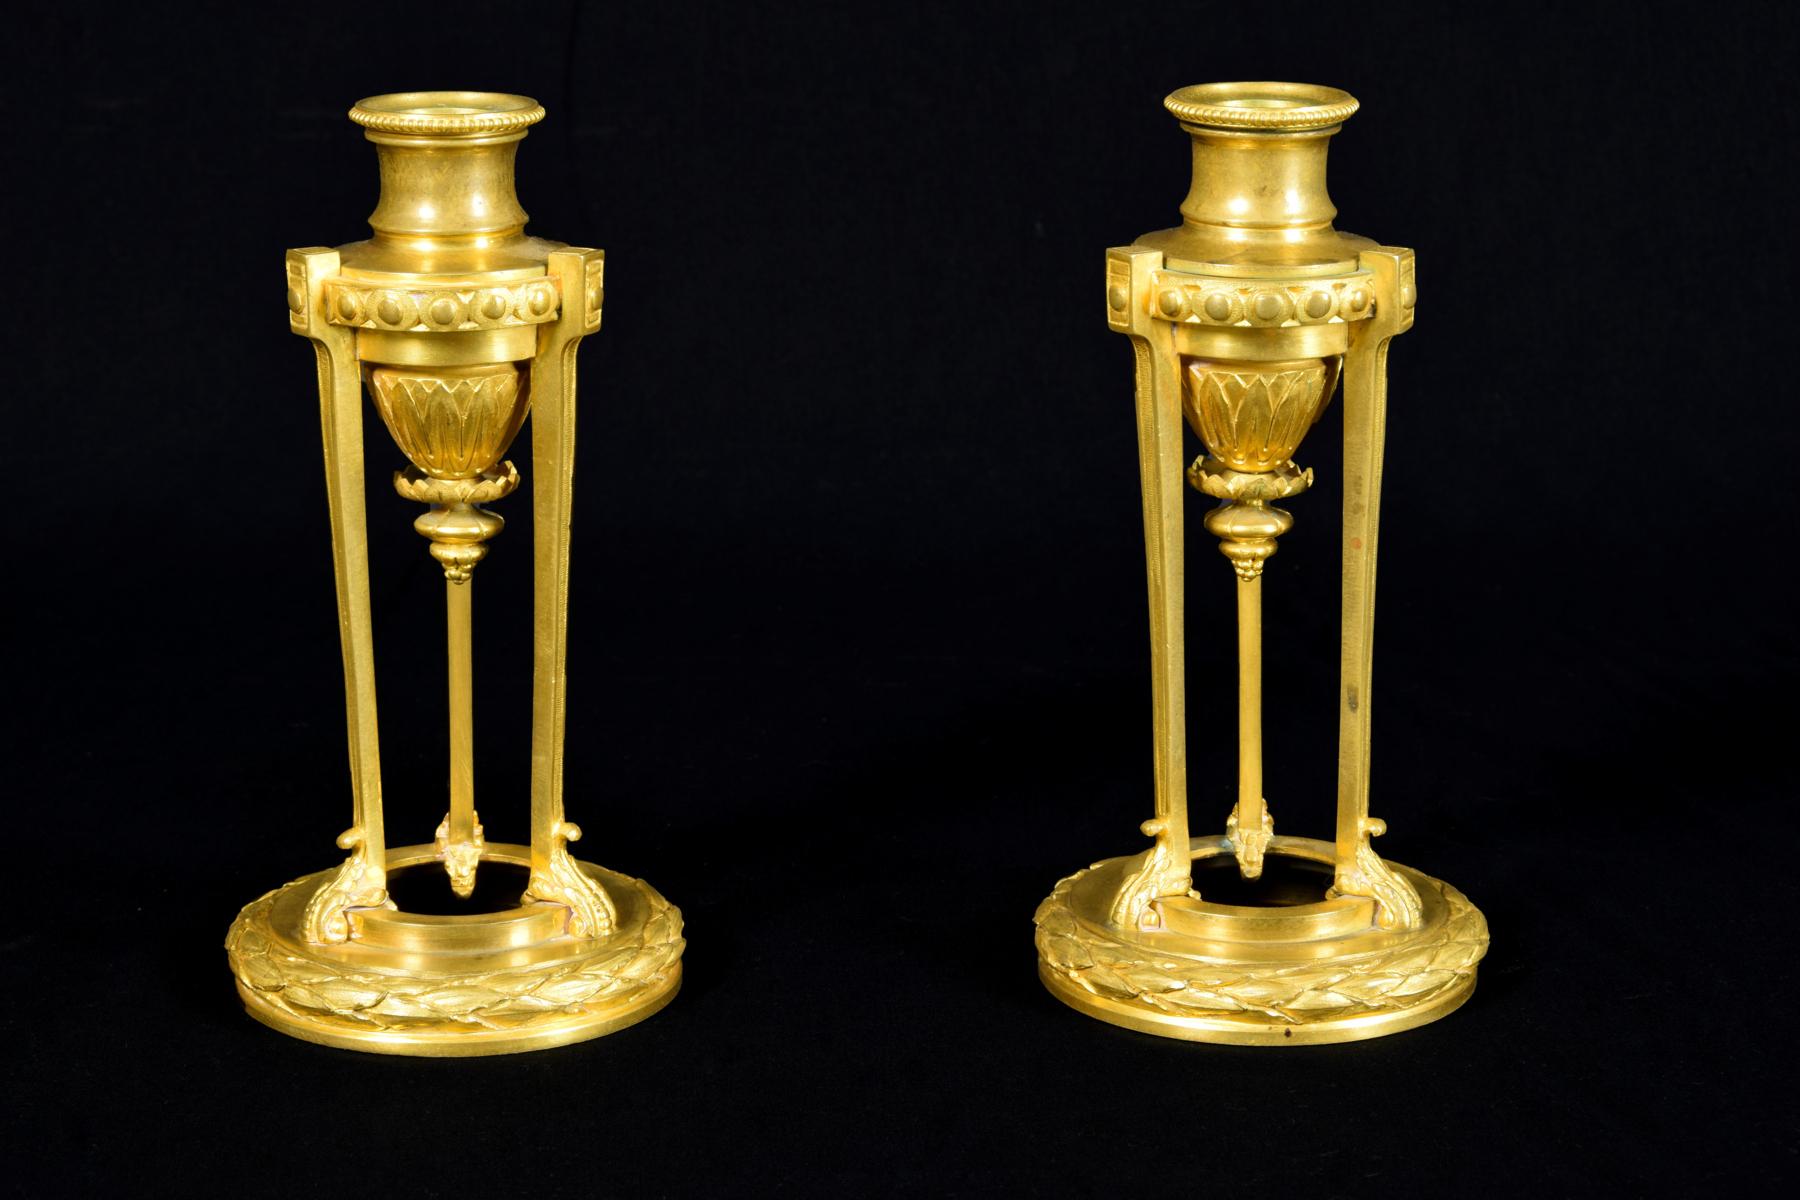 19th century, small pair of French chiseled gilded bronze candlesticks

The elegant and refined pair of bronze candlesticks finely chiselled and gilded was made in France circa mid-19th century in Louis XVI style.
The tripod-shaped objects have a